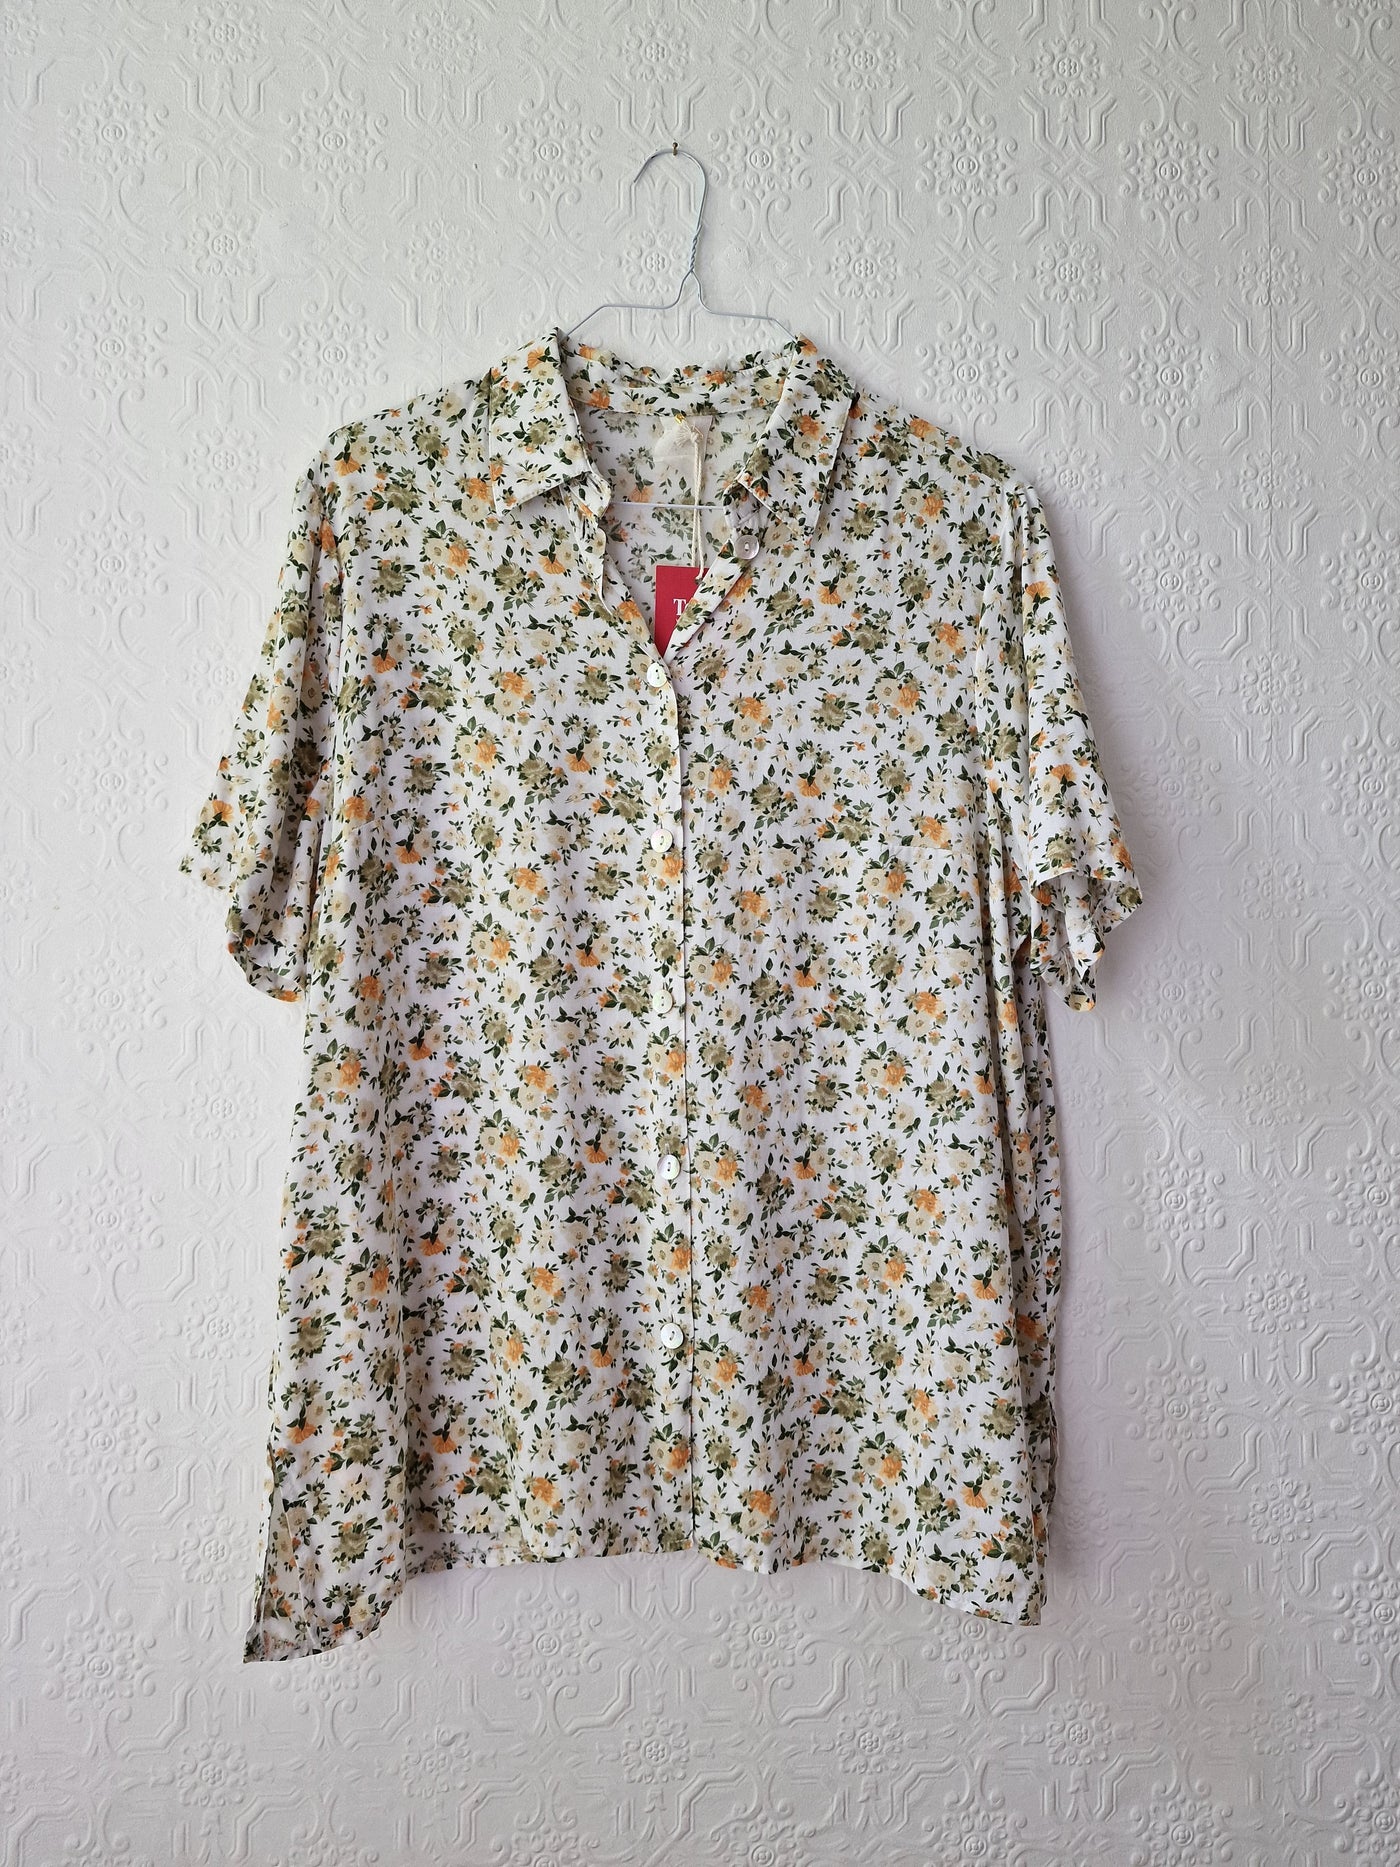 Vintage 80s White Short Sleeve Blouse with Green Floral Print - L